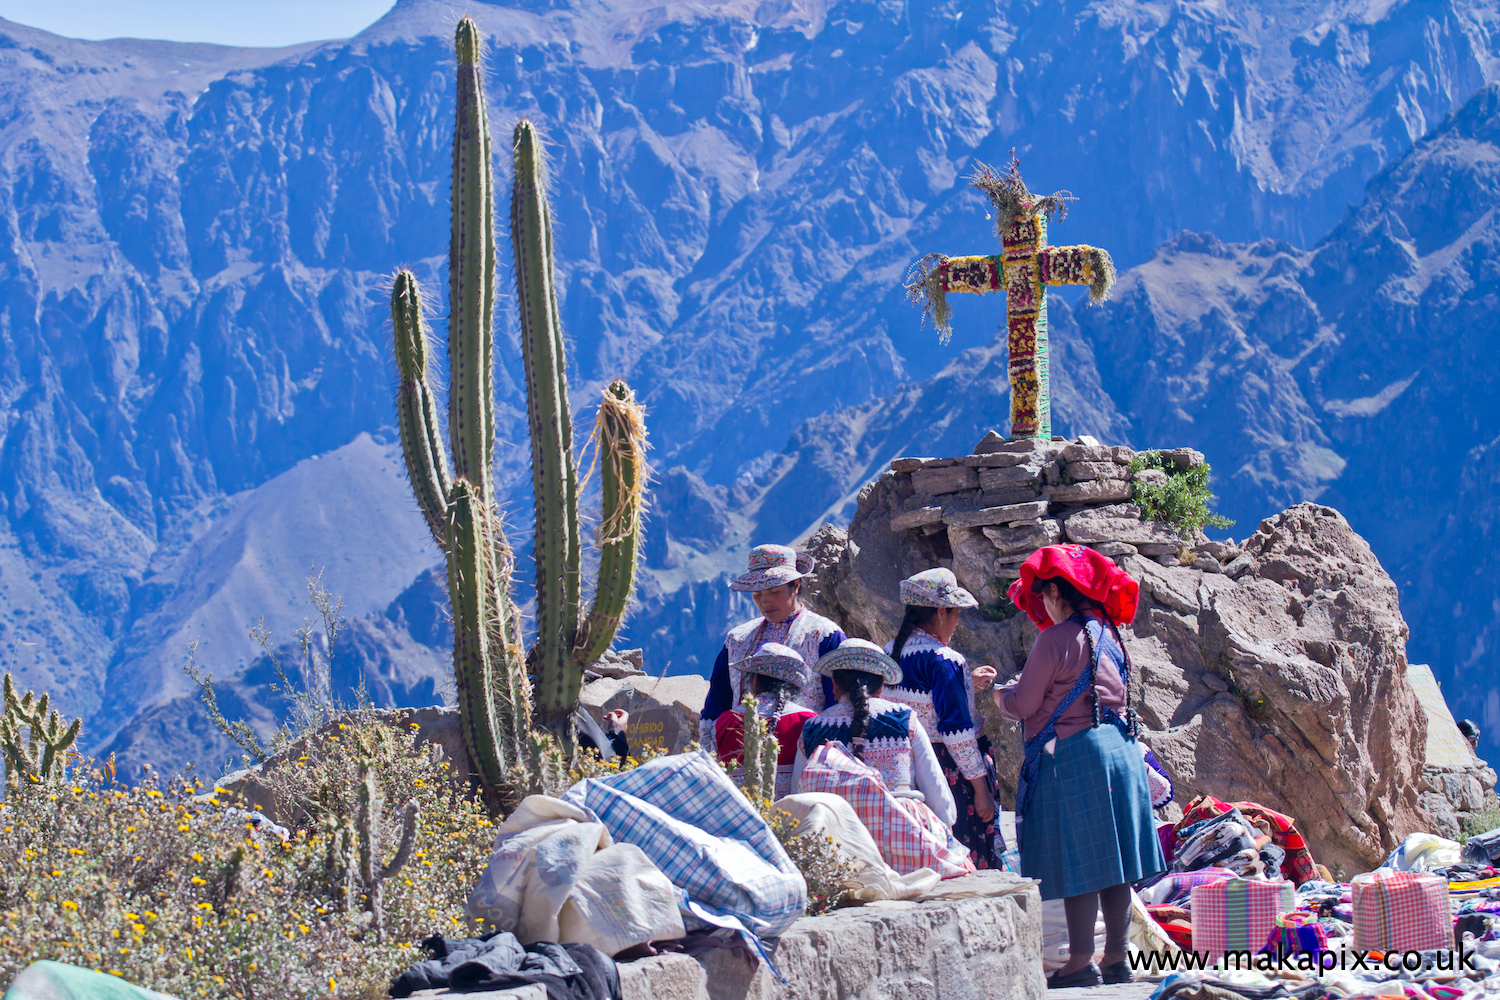 Colca Canyon, Peru, famed as one of the world's deepest